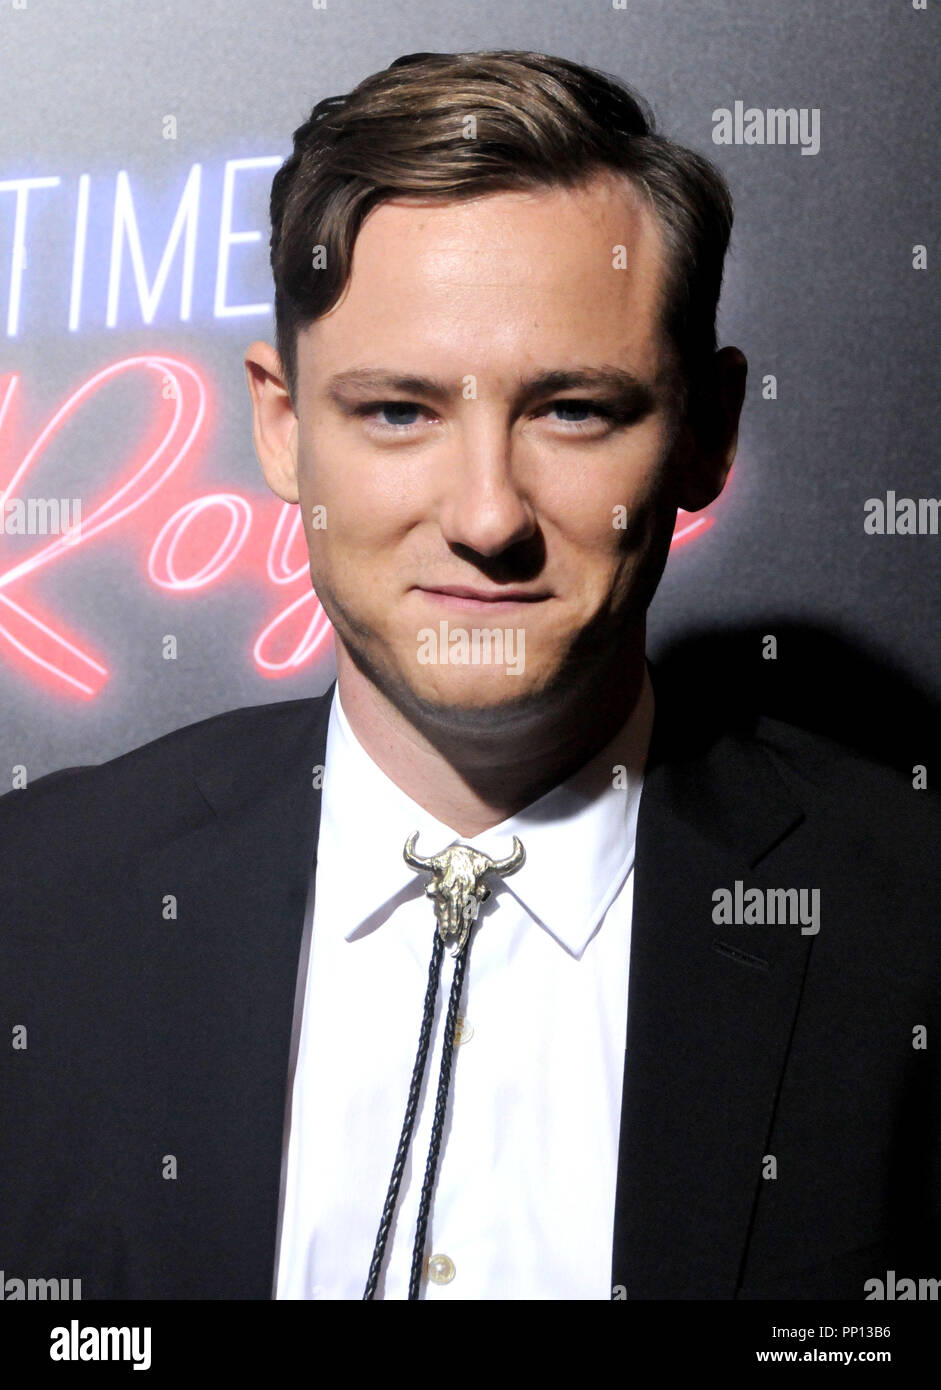 Hollywood Usa 22 September 18 Actor Lewis Pullman Attends The Global Premiere Of th Century Fox S Bad Times At The El Royale On September 22 18 At Tcl Chinese Theatre In Hollywood